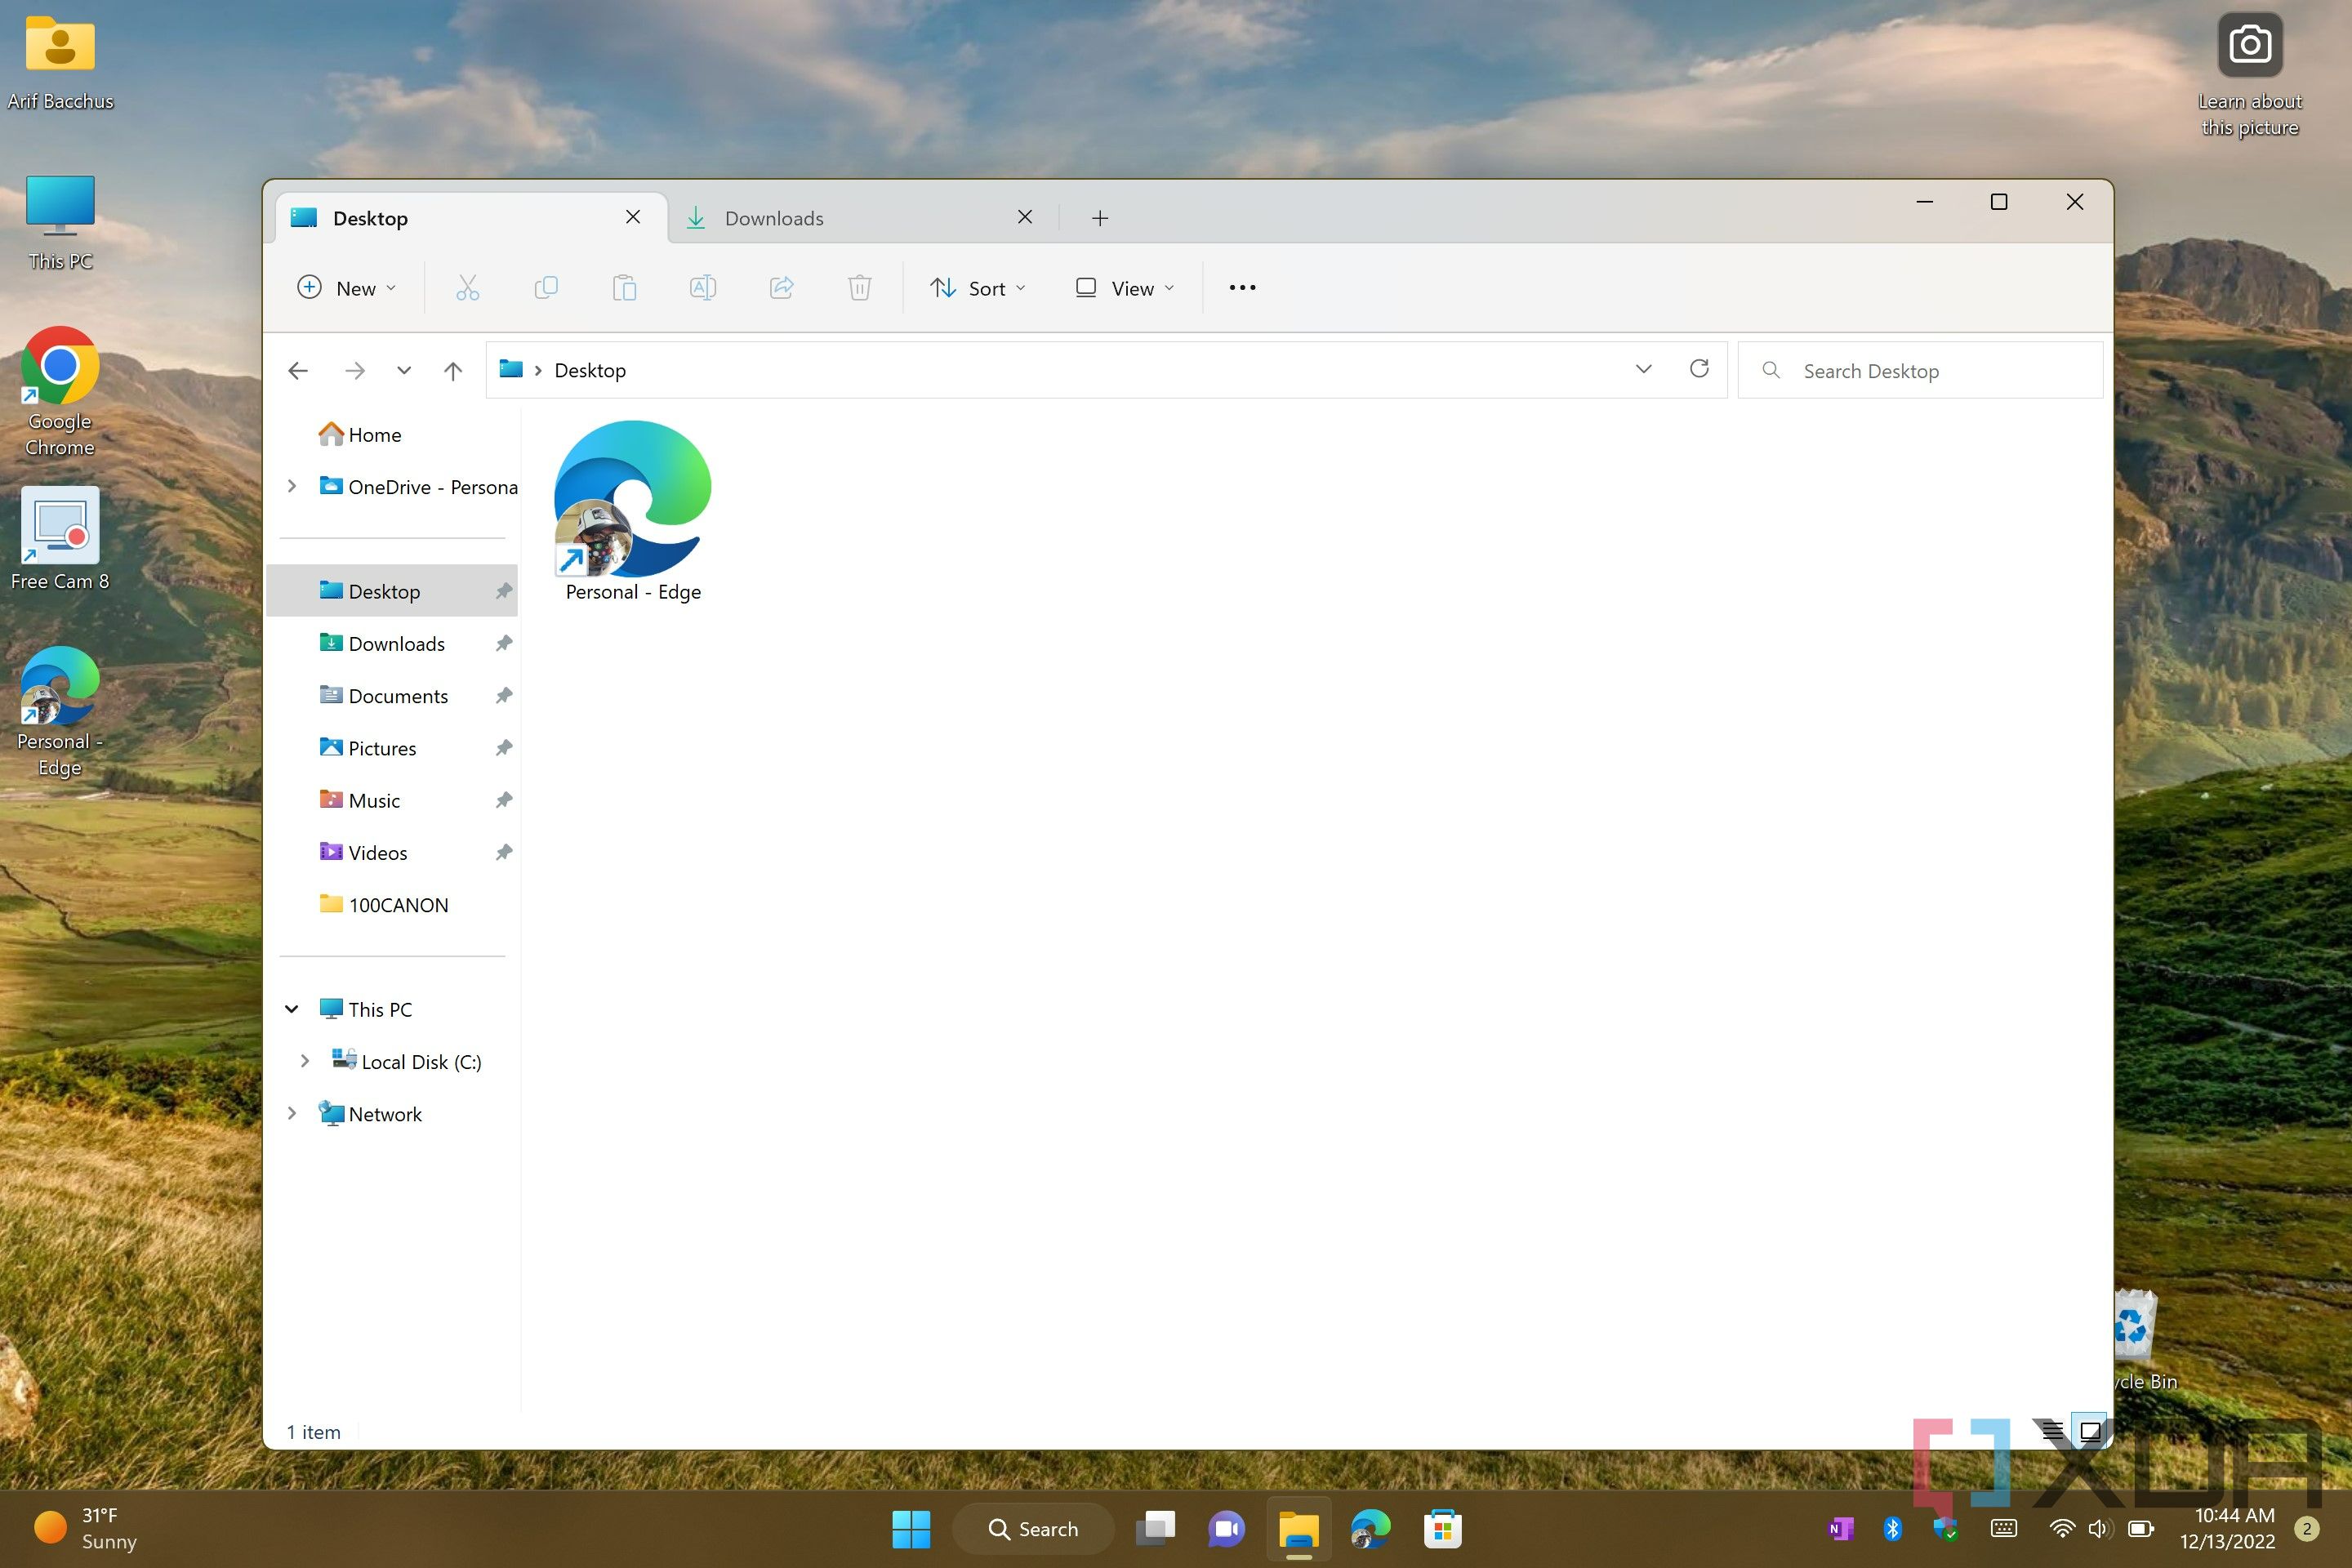 The tabbed interface in the Windows 11 File Explorer app